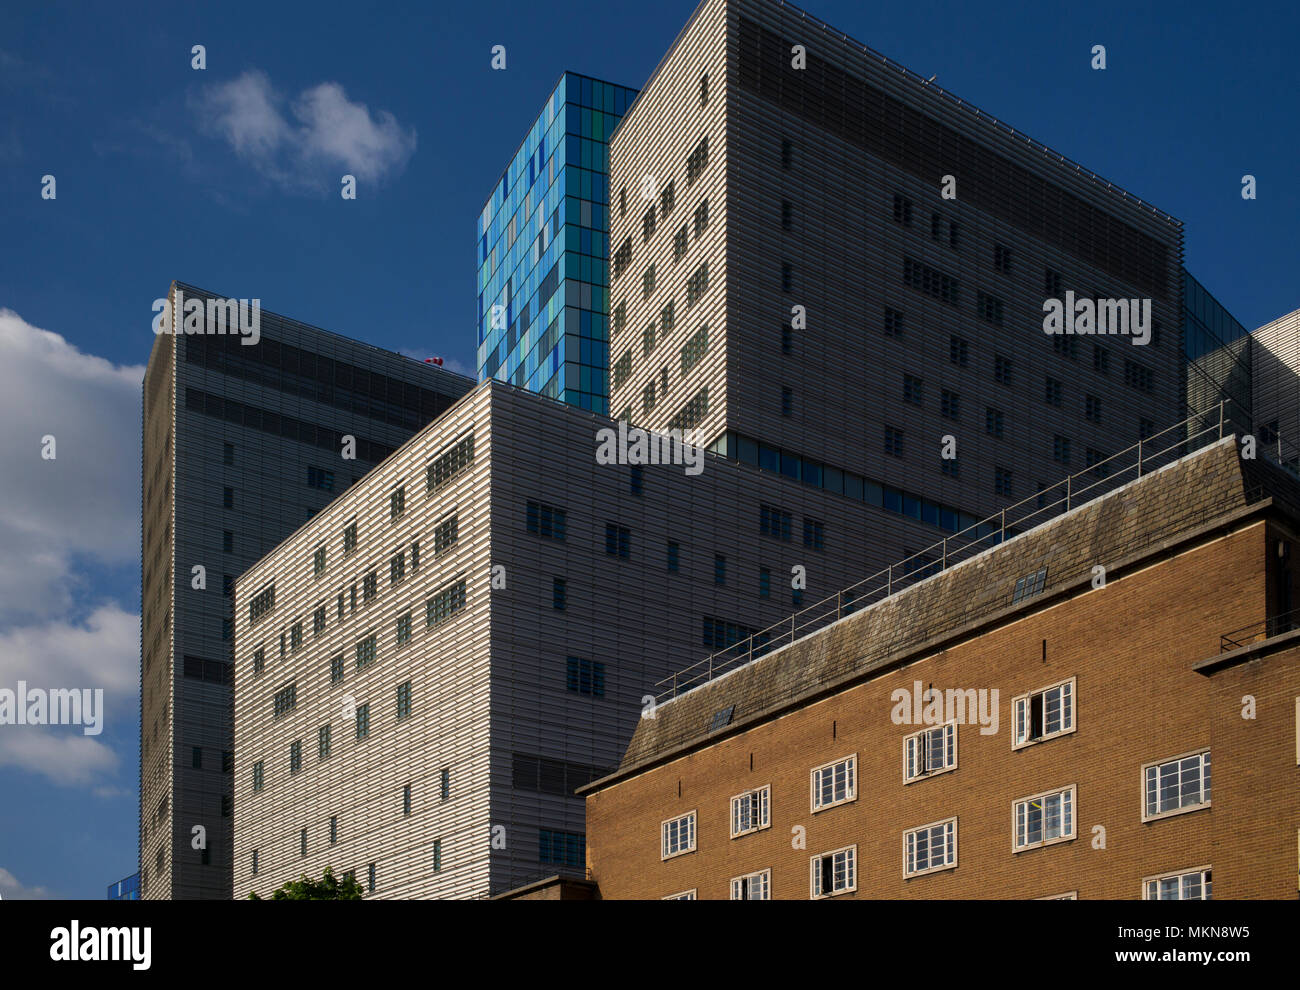 Royal London Hospital, Whitechapel, Tower Hamlets London England UK. May 2018 The Royal London Hospital is a large teaching hospital in London, United Stock Photo